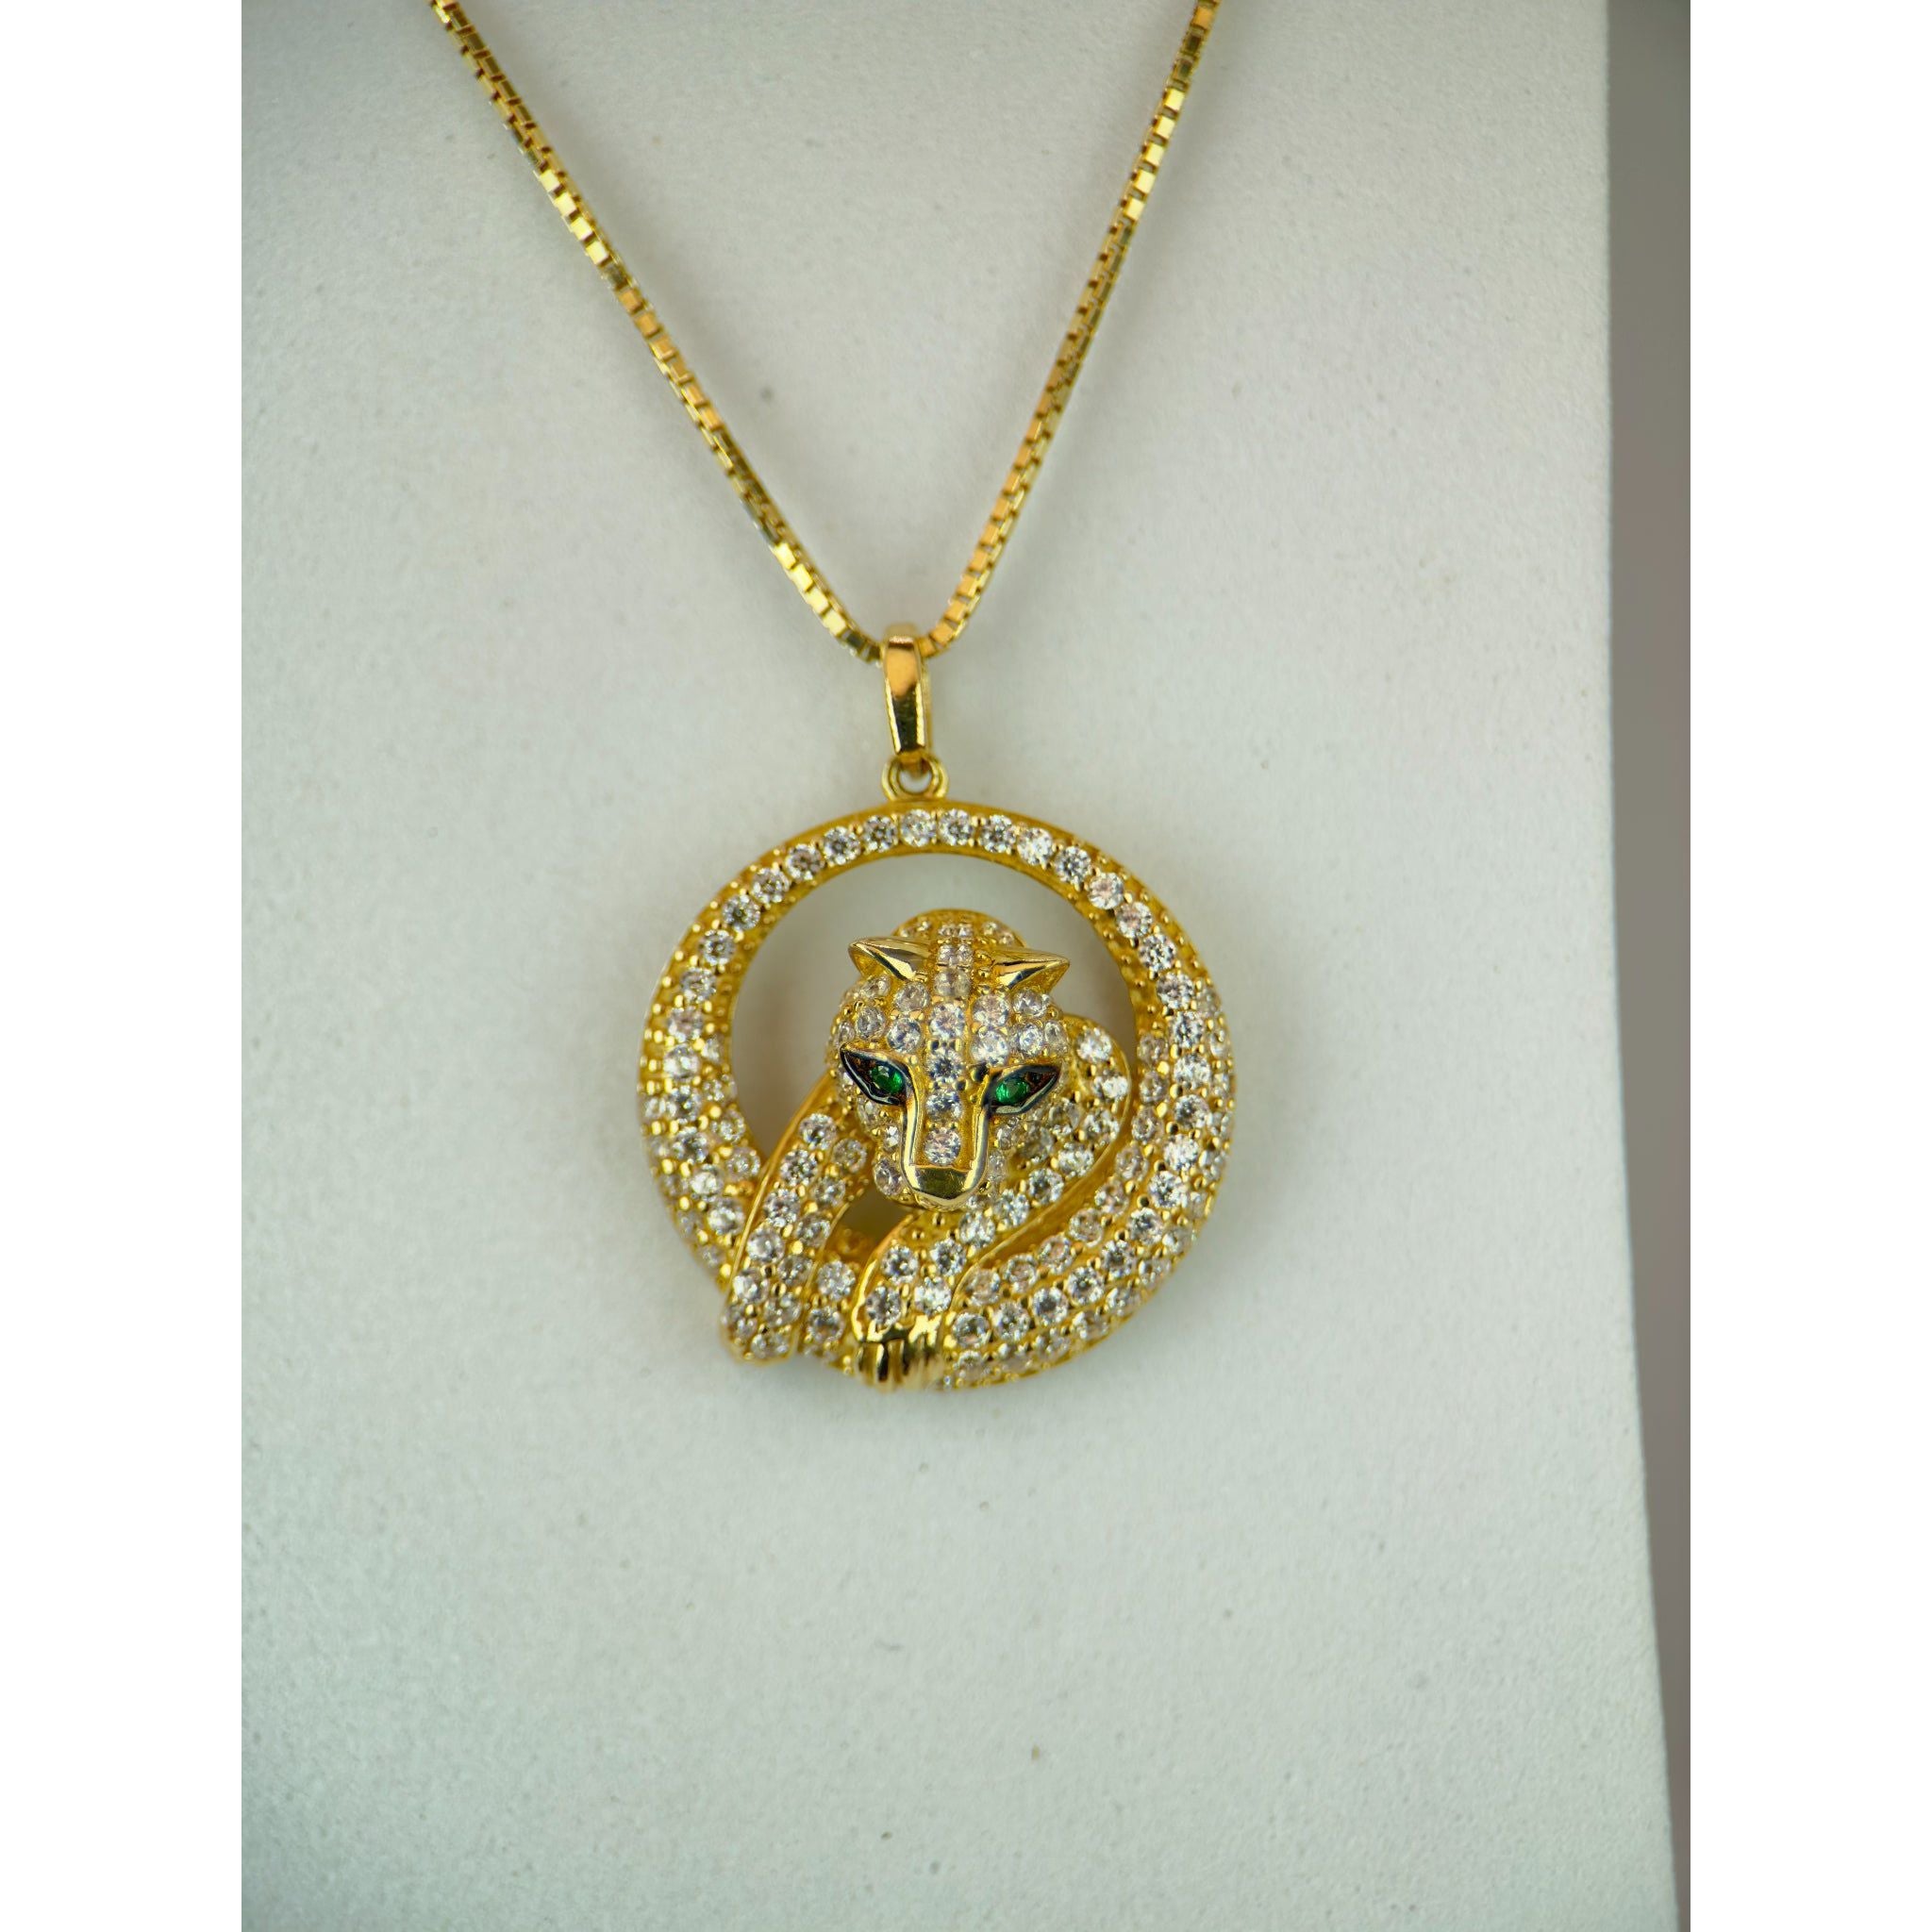 DR1920 - 14K Yellow Gold - Lab Created Stones - Gold Chain & Charm - 14K Gold Tiger w/Emerald Eyes